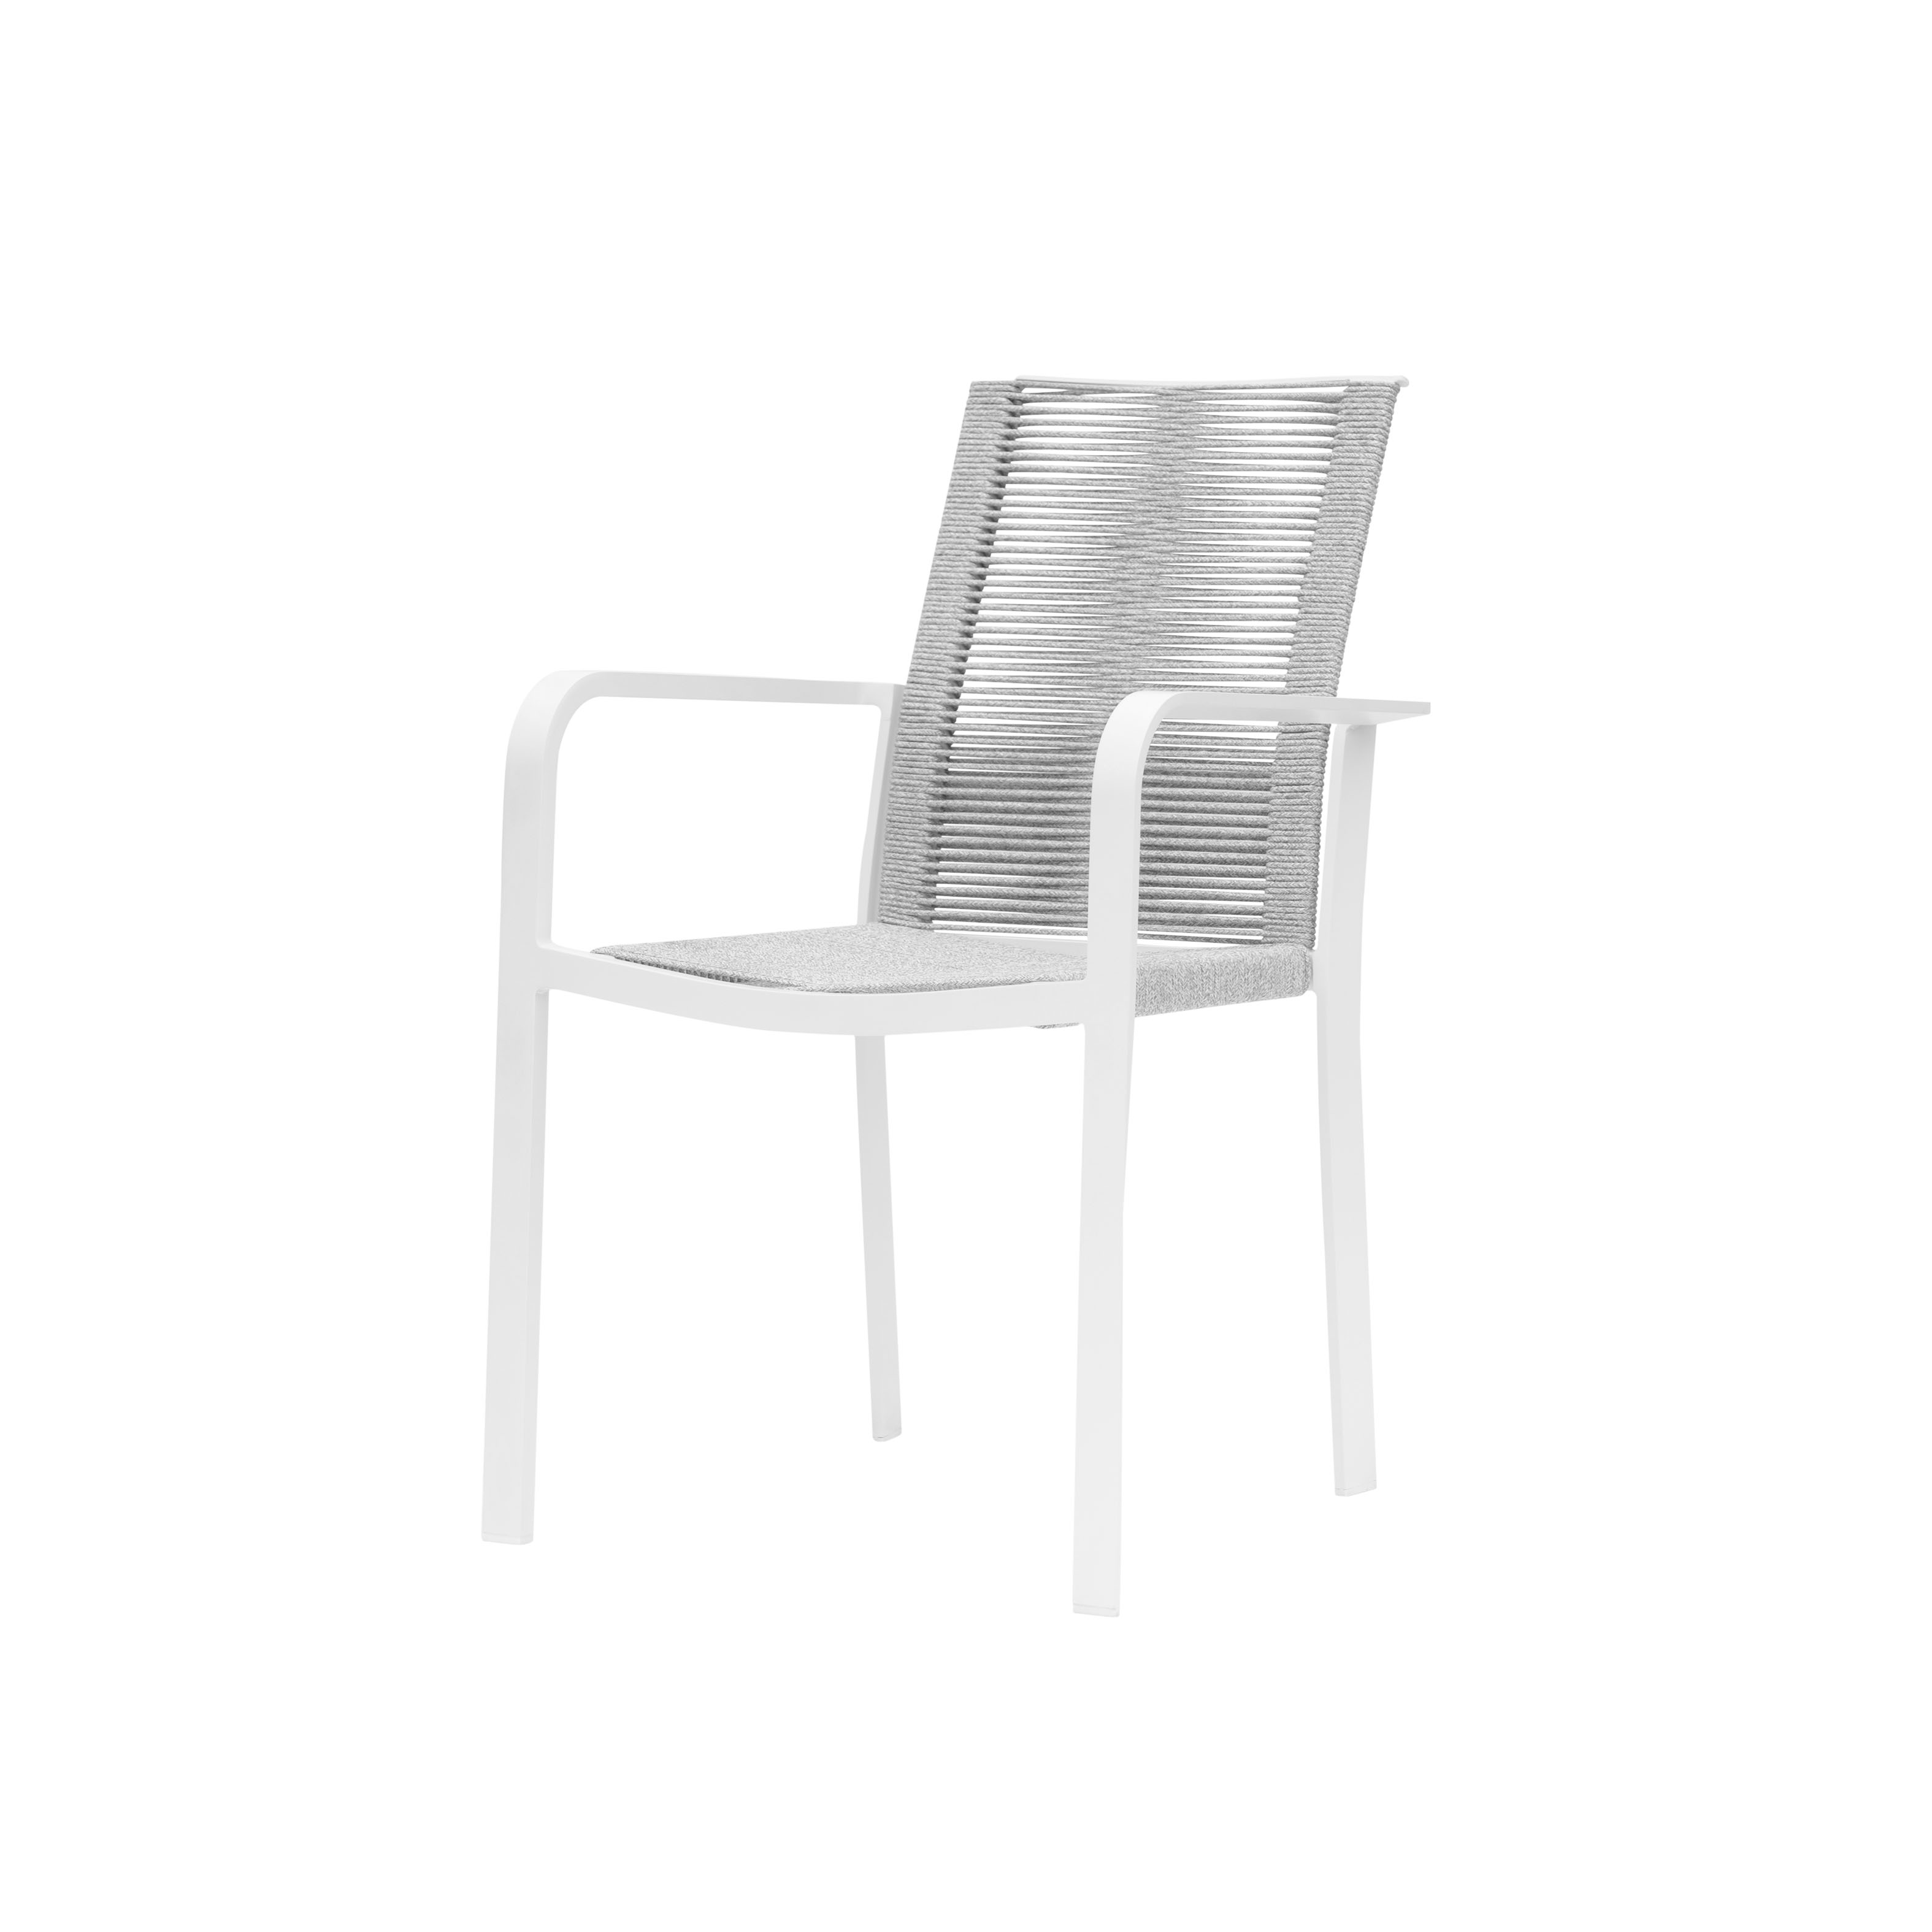 Linz dining chair S1